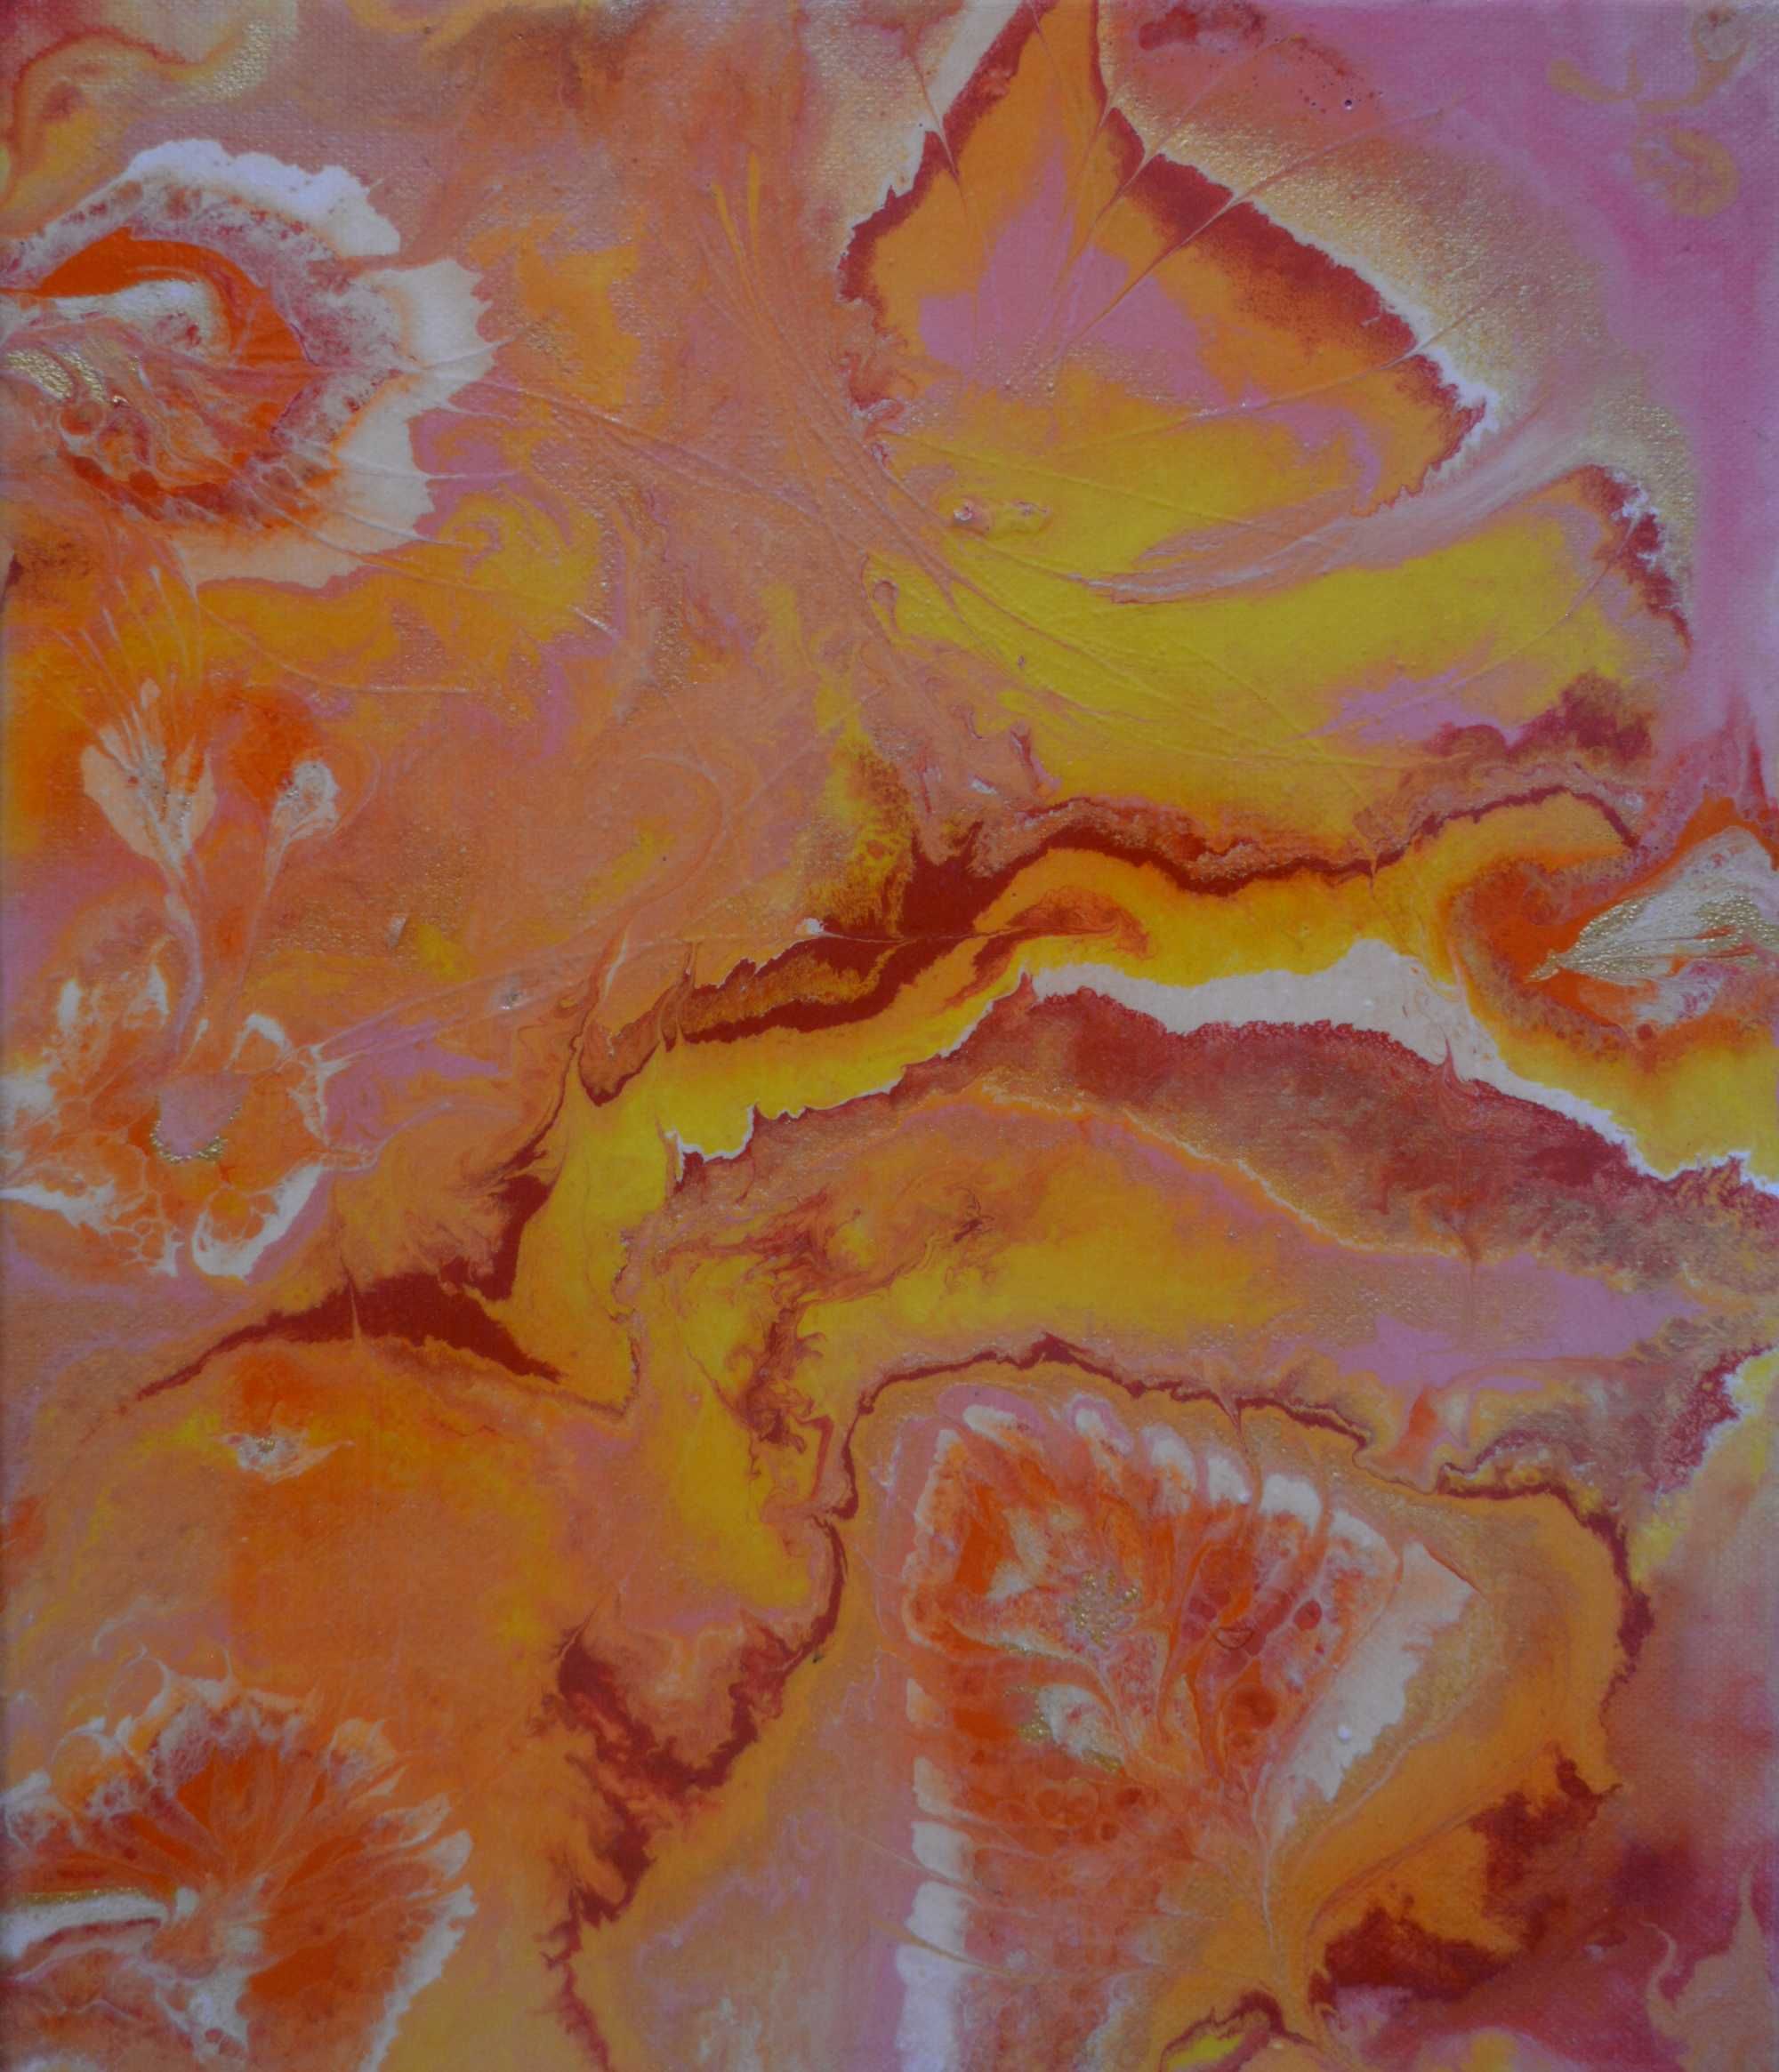 Pictura abstracta "Sweet delight" (acrylic paint pouring)